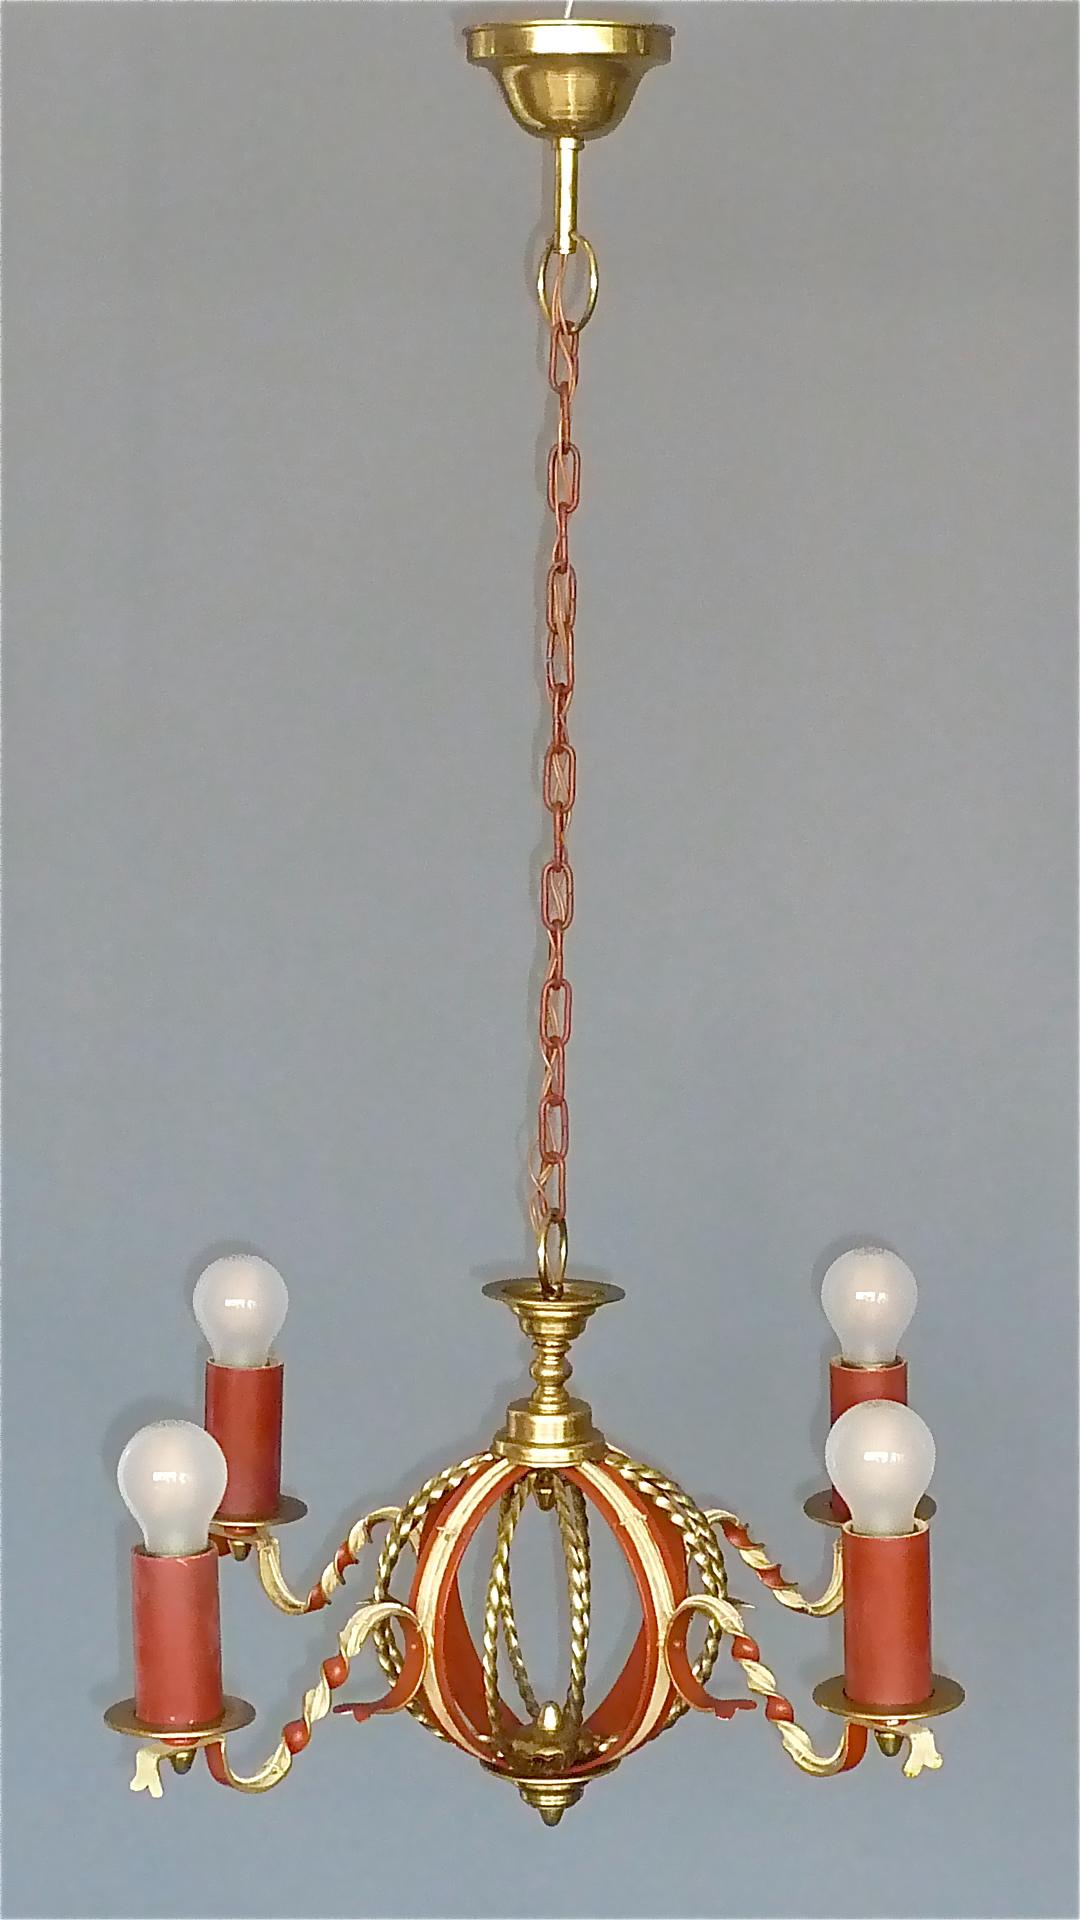 Large French Poillerat Style Globe Chandelier Wrought Iron Brass 1950s no.1 of 2 For Sale 1